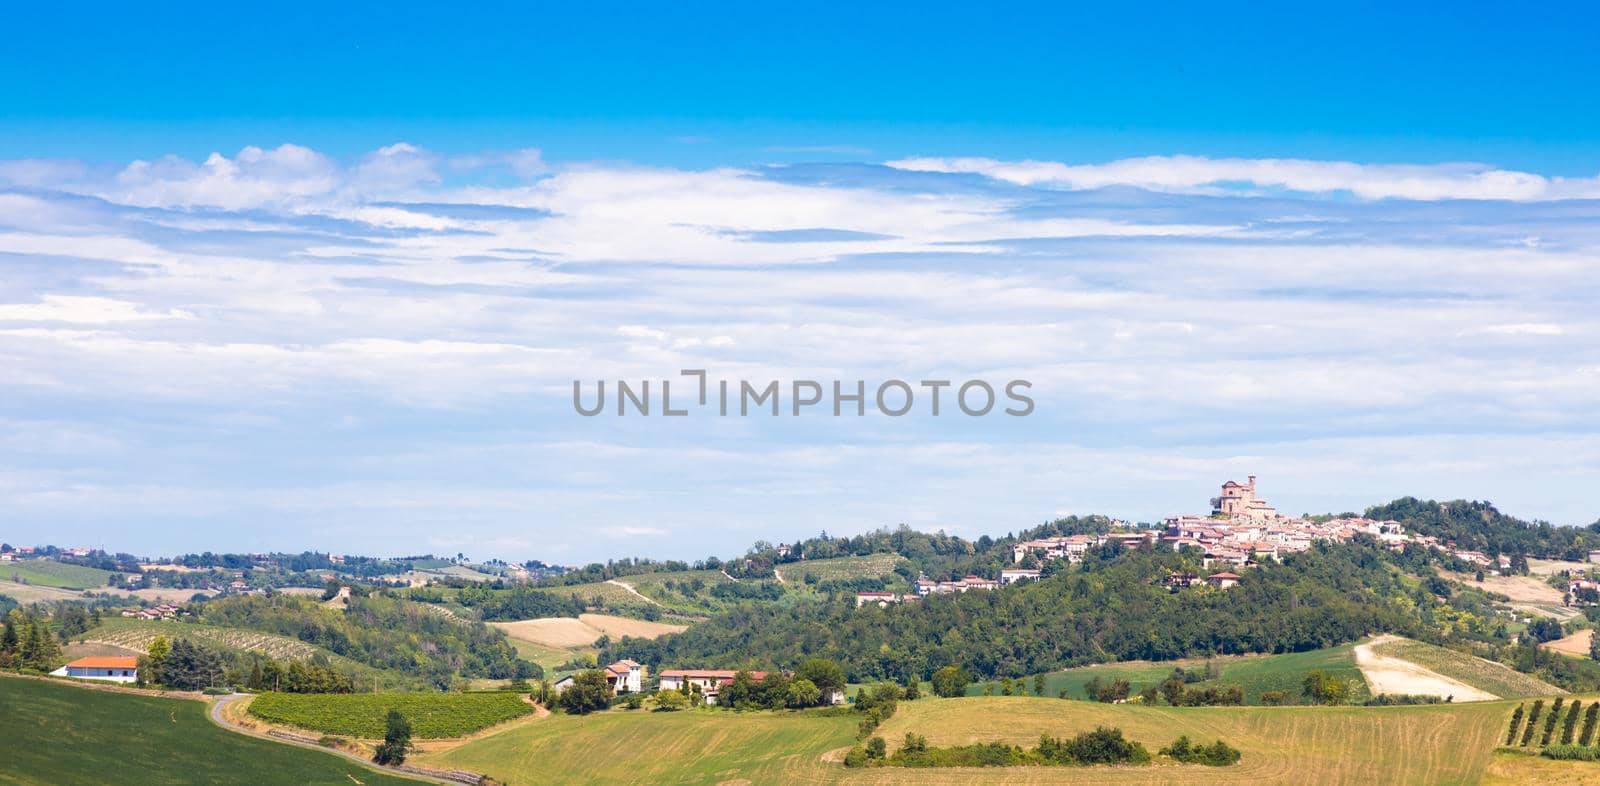  Piedmont region, Italy. Countryside landscape in Langhe area by Perseomedusa